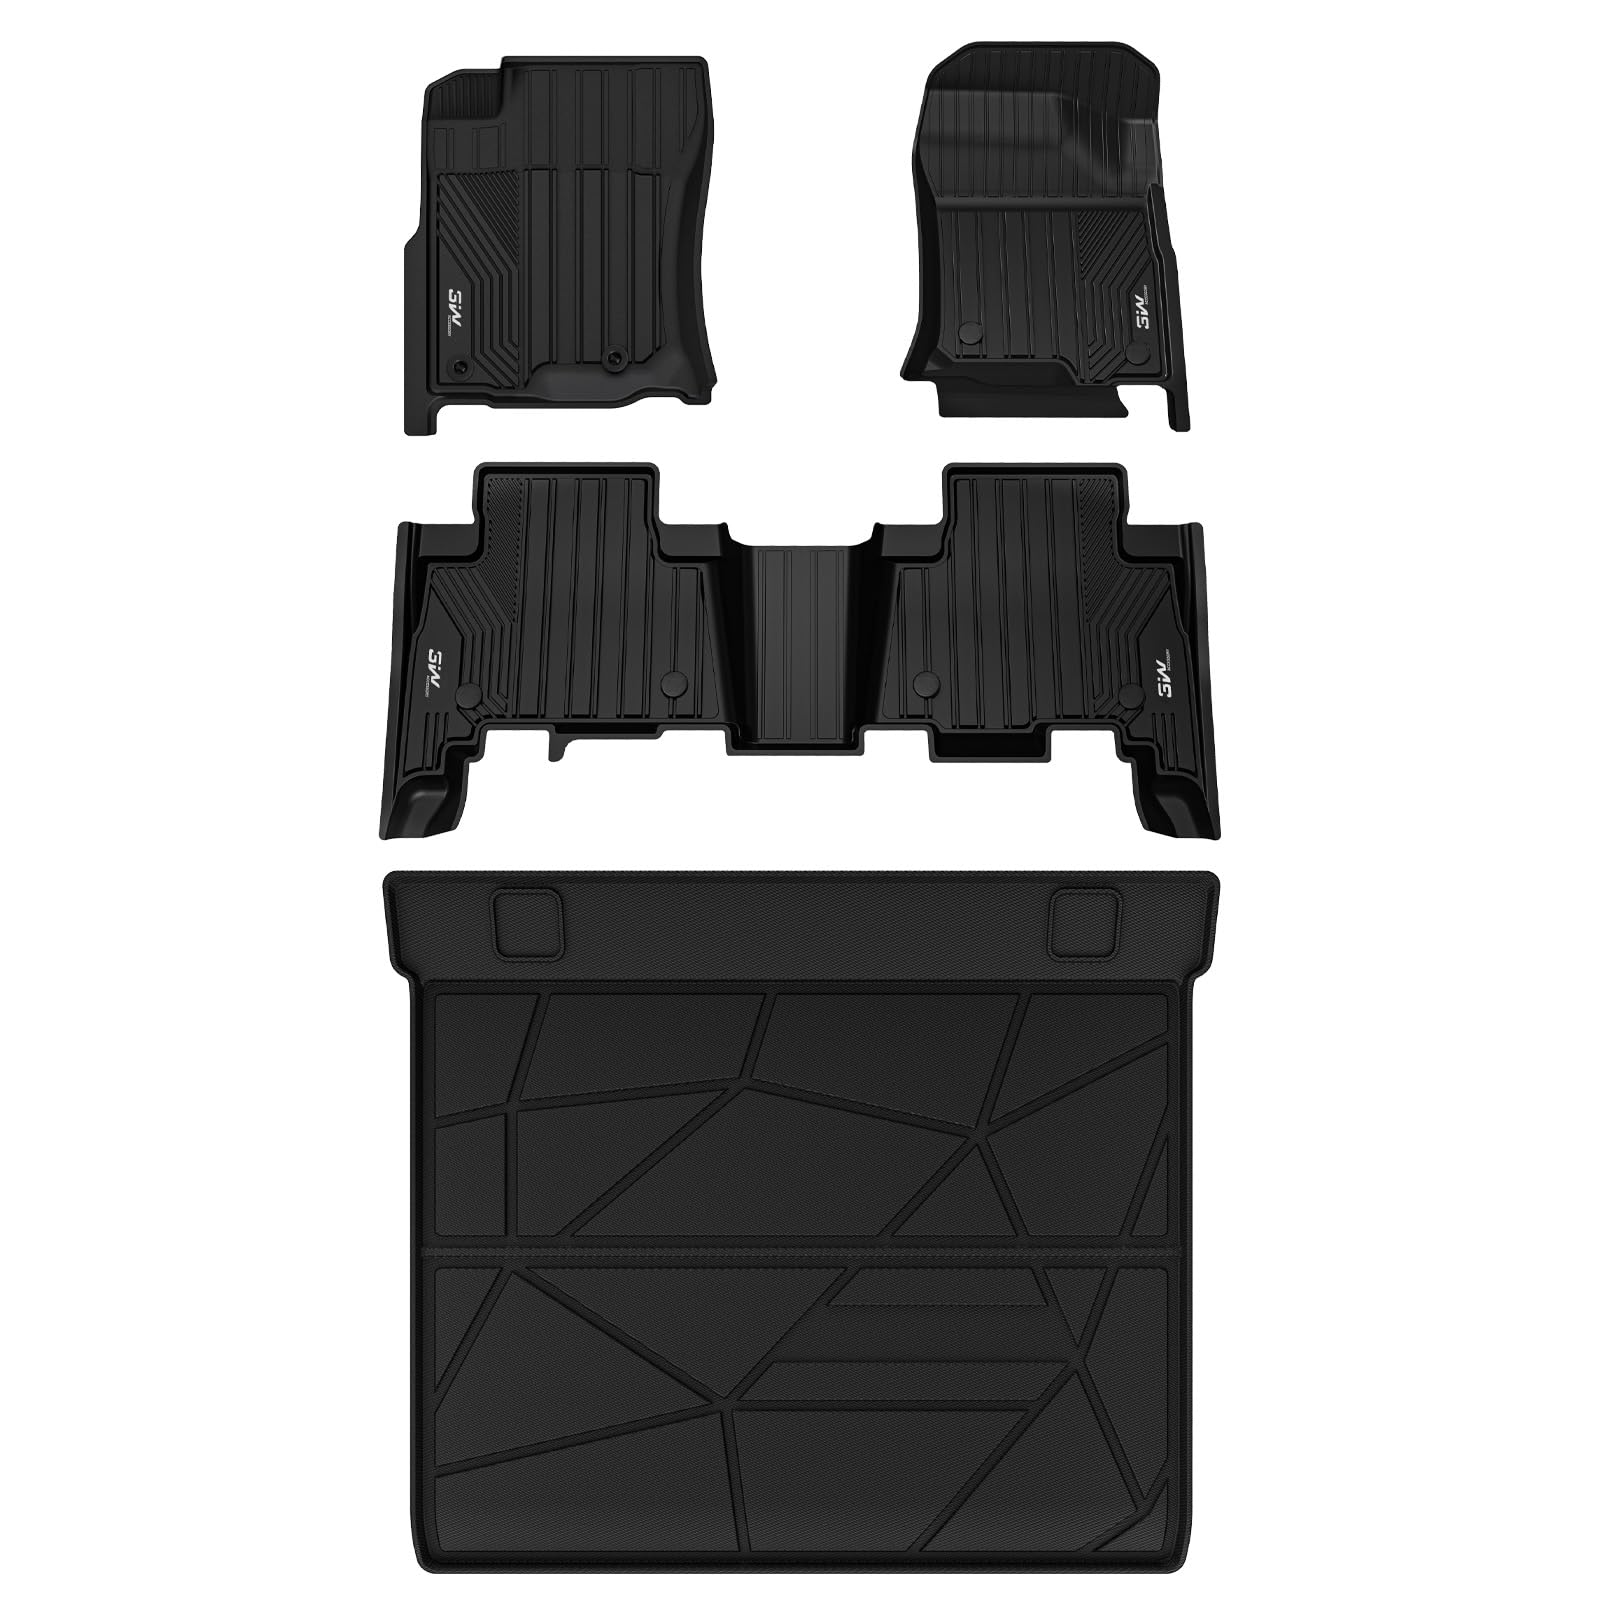 3W Toyota 4Runner 2013-2024 (Only for 5 Seat) Custom Floor Mats TPE Material & All-Weather Protection Vehicles & Parts 3Wliners 2013-2024 4Runner 2013-2024 1st&2nd Row+Trunk Mat